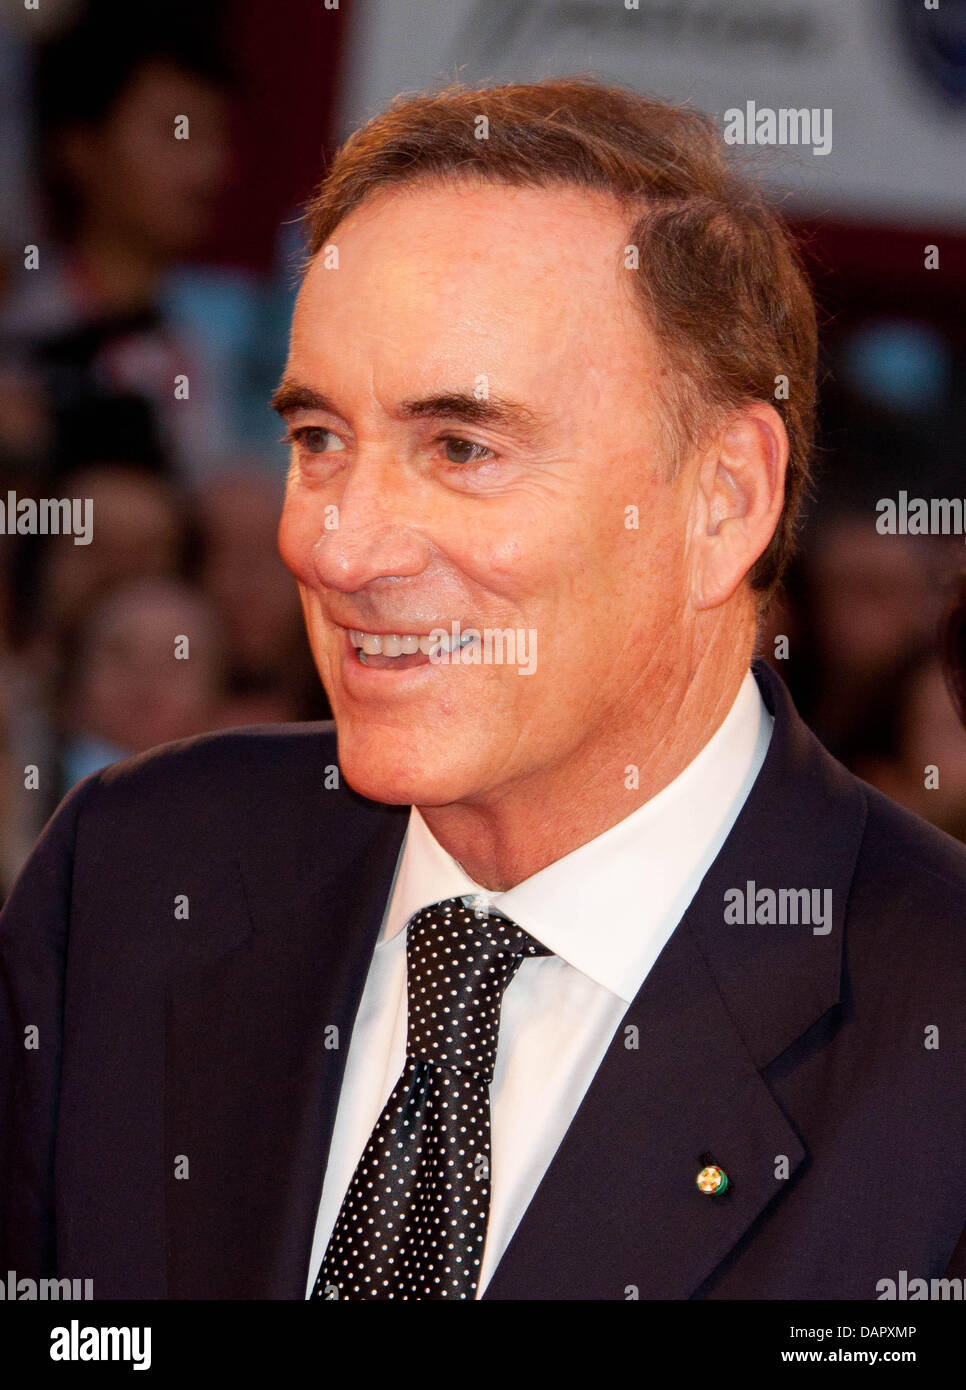 Low-Res abspeichern - warner-bros-executive-richard-fox-arrives-at-the-premiere-of-contagion-DAPXMP